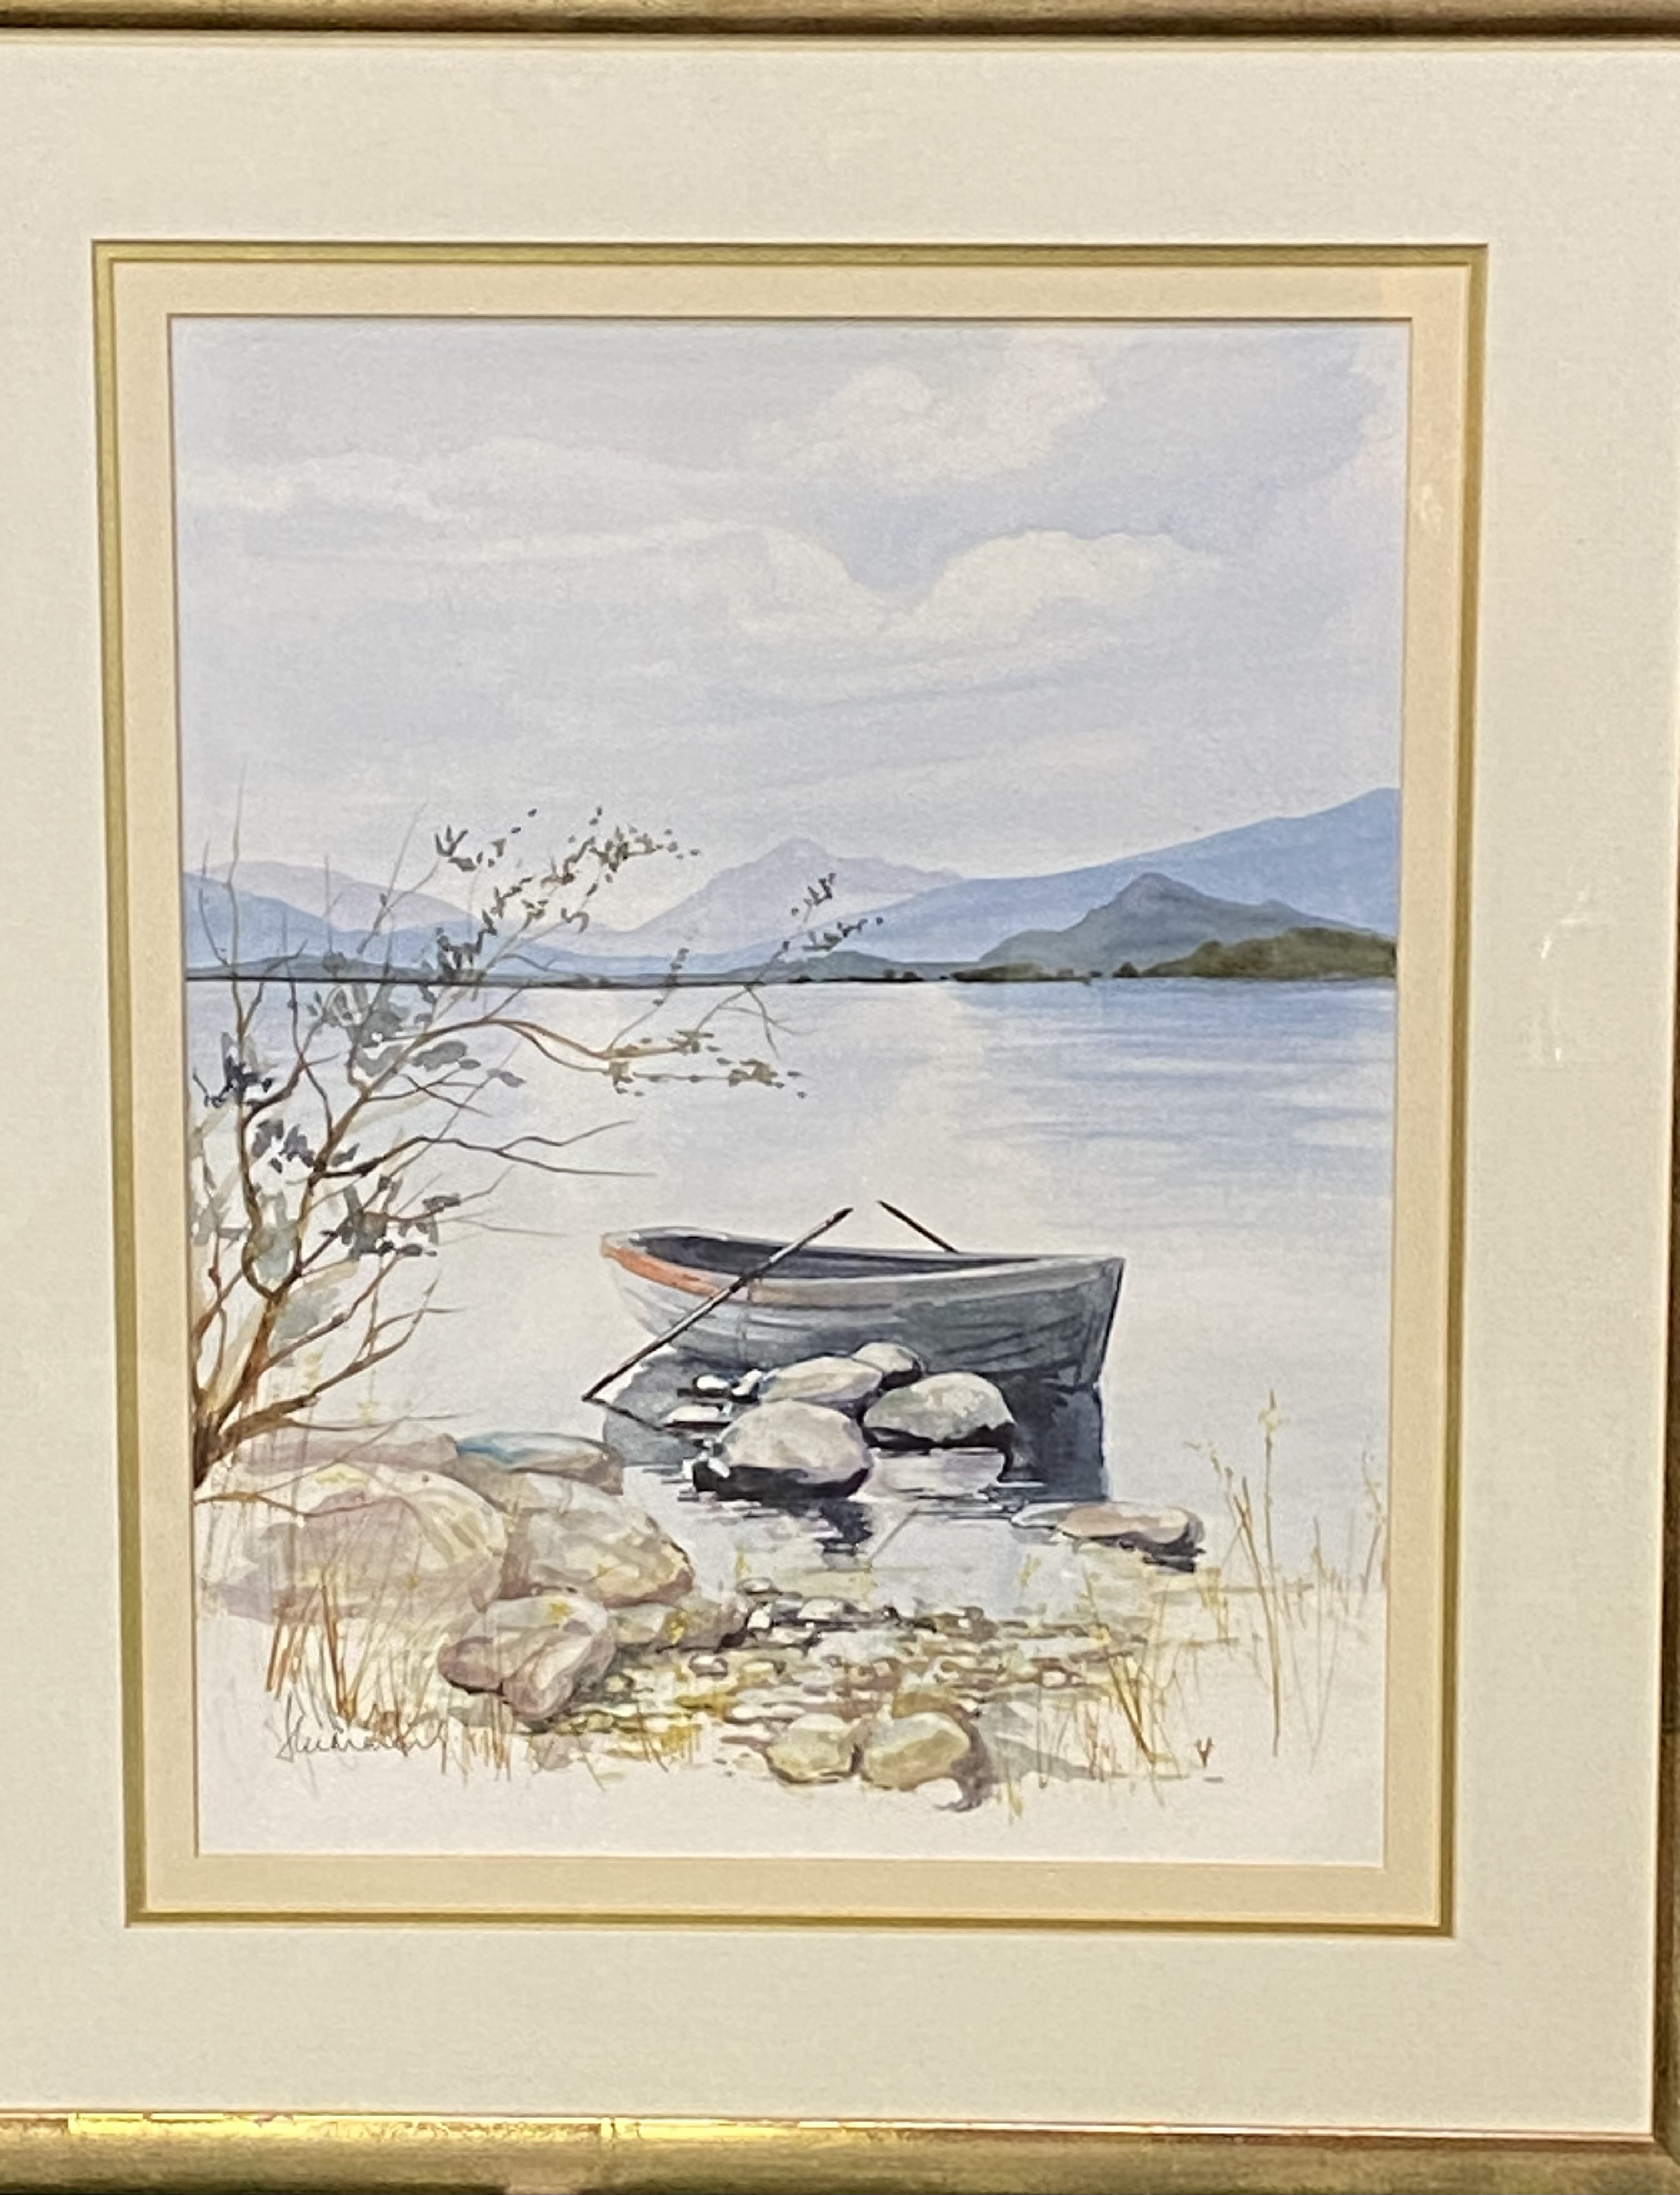 Framed and glazed watercolour of a lake scene signed by artist - Image 2 of 3